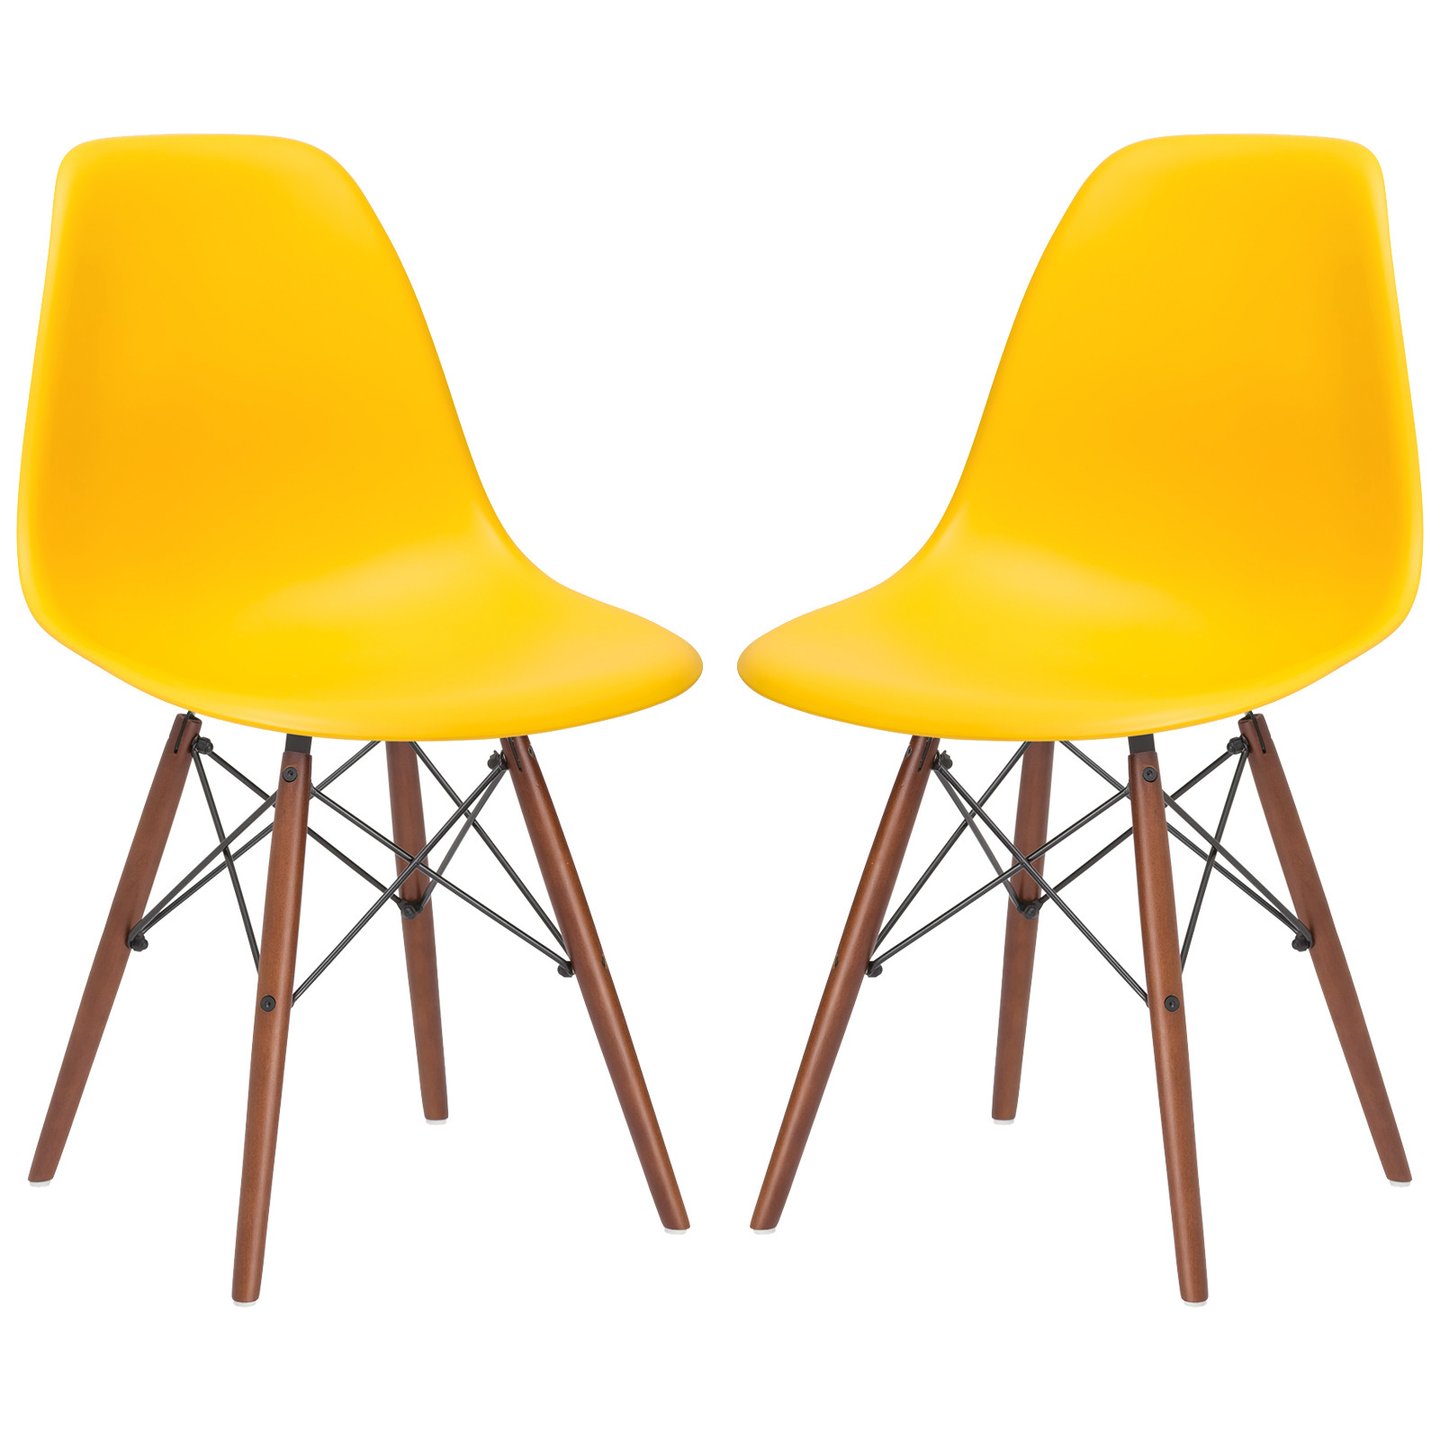 Set of 2 - Vortex Side Chairs with Walnut Legs - Yellow